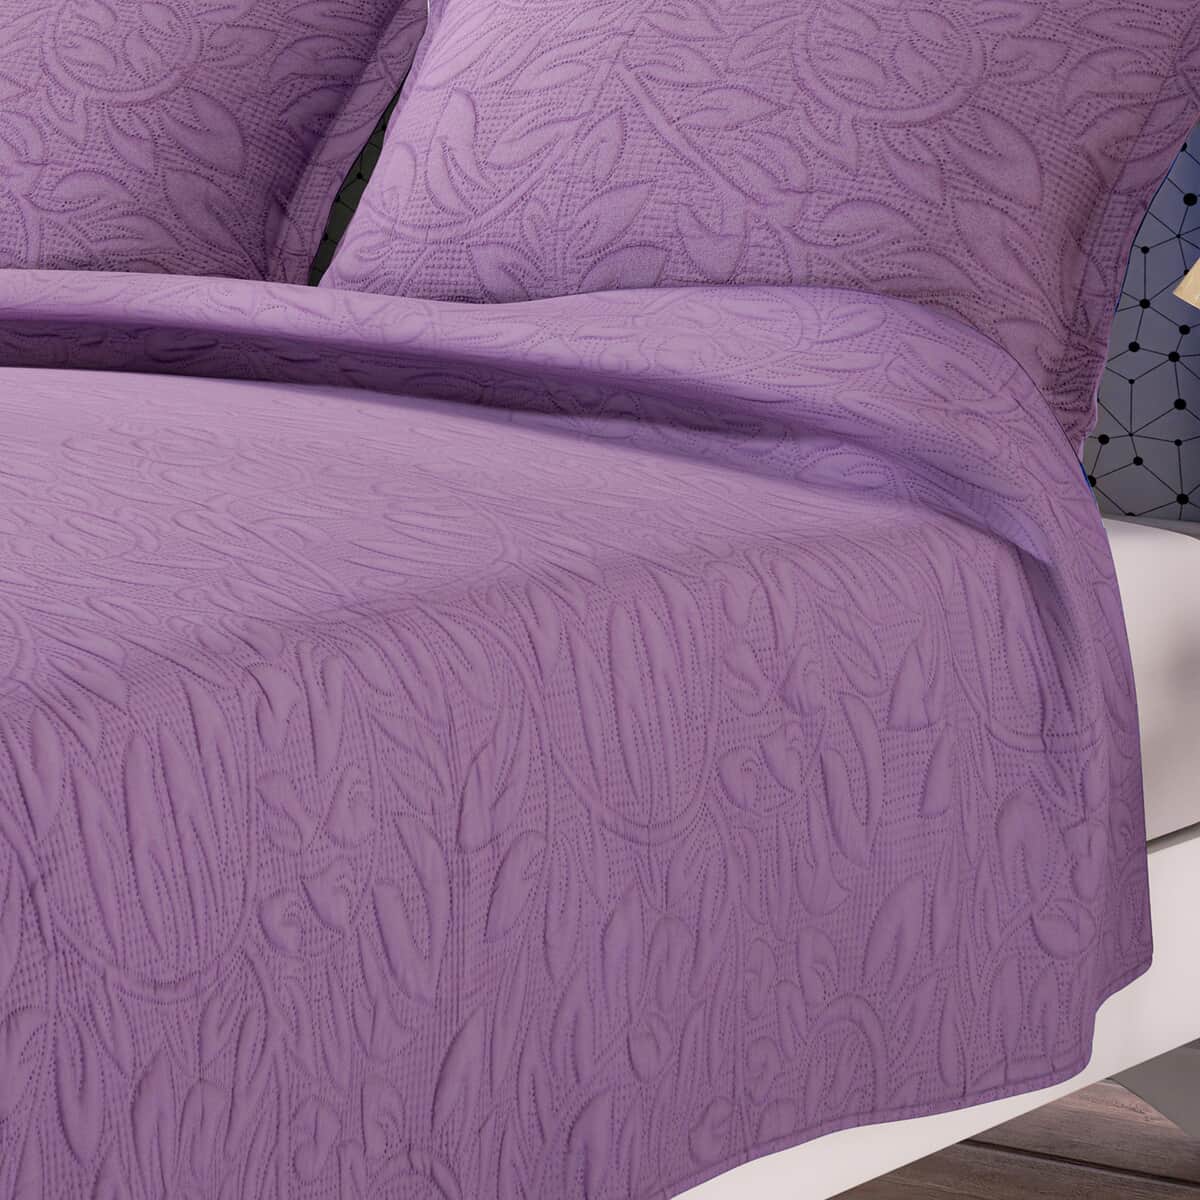 Homesmart Mauve 3D Pinsonic Embossed Pattern Quilt with 2 Shams - Queen (Microfiber) image number 1